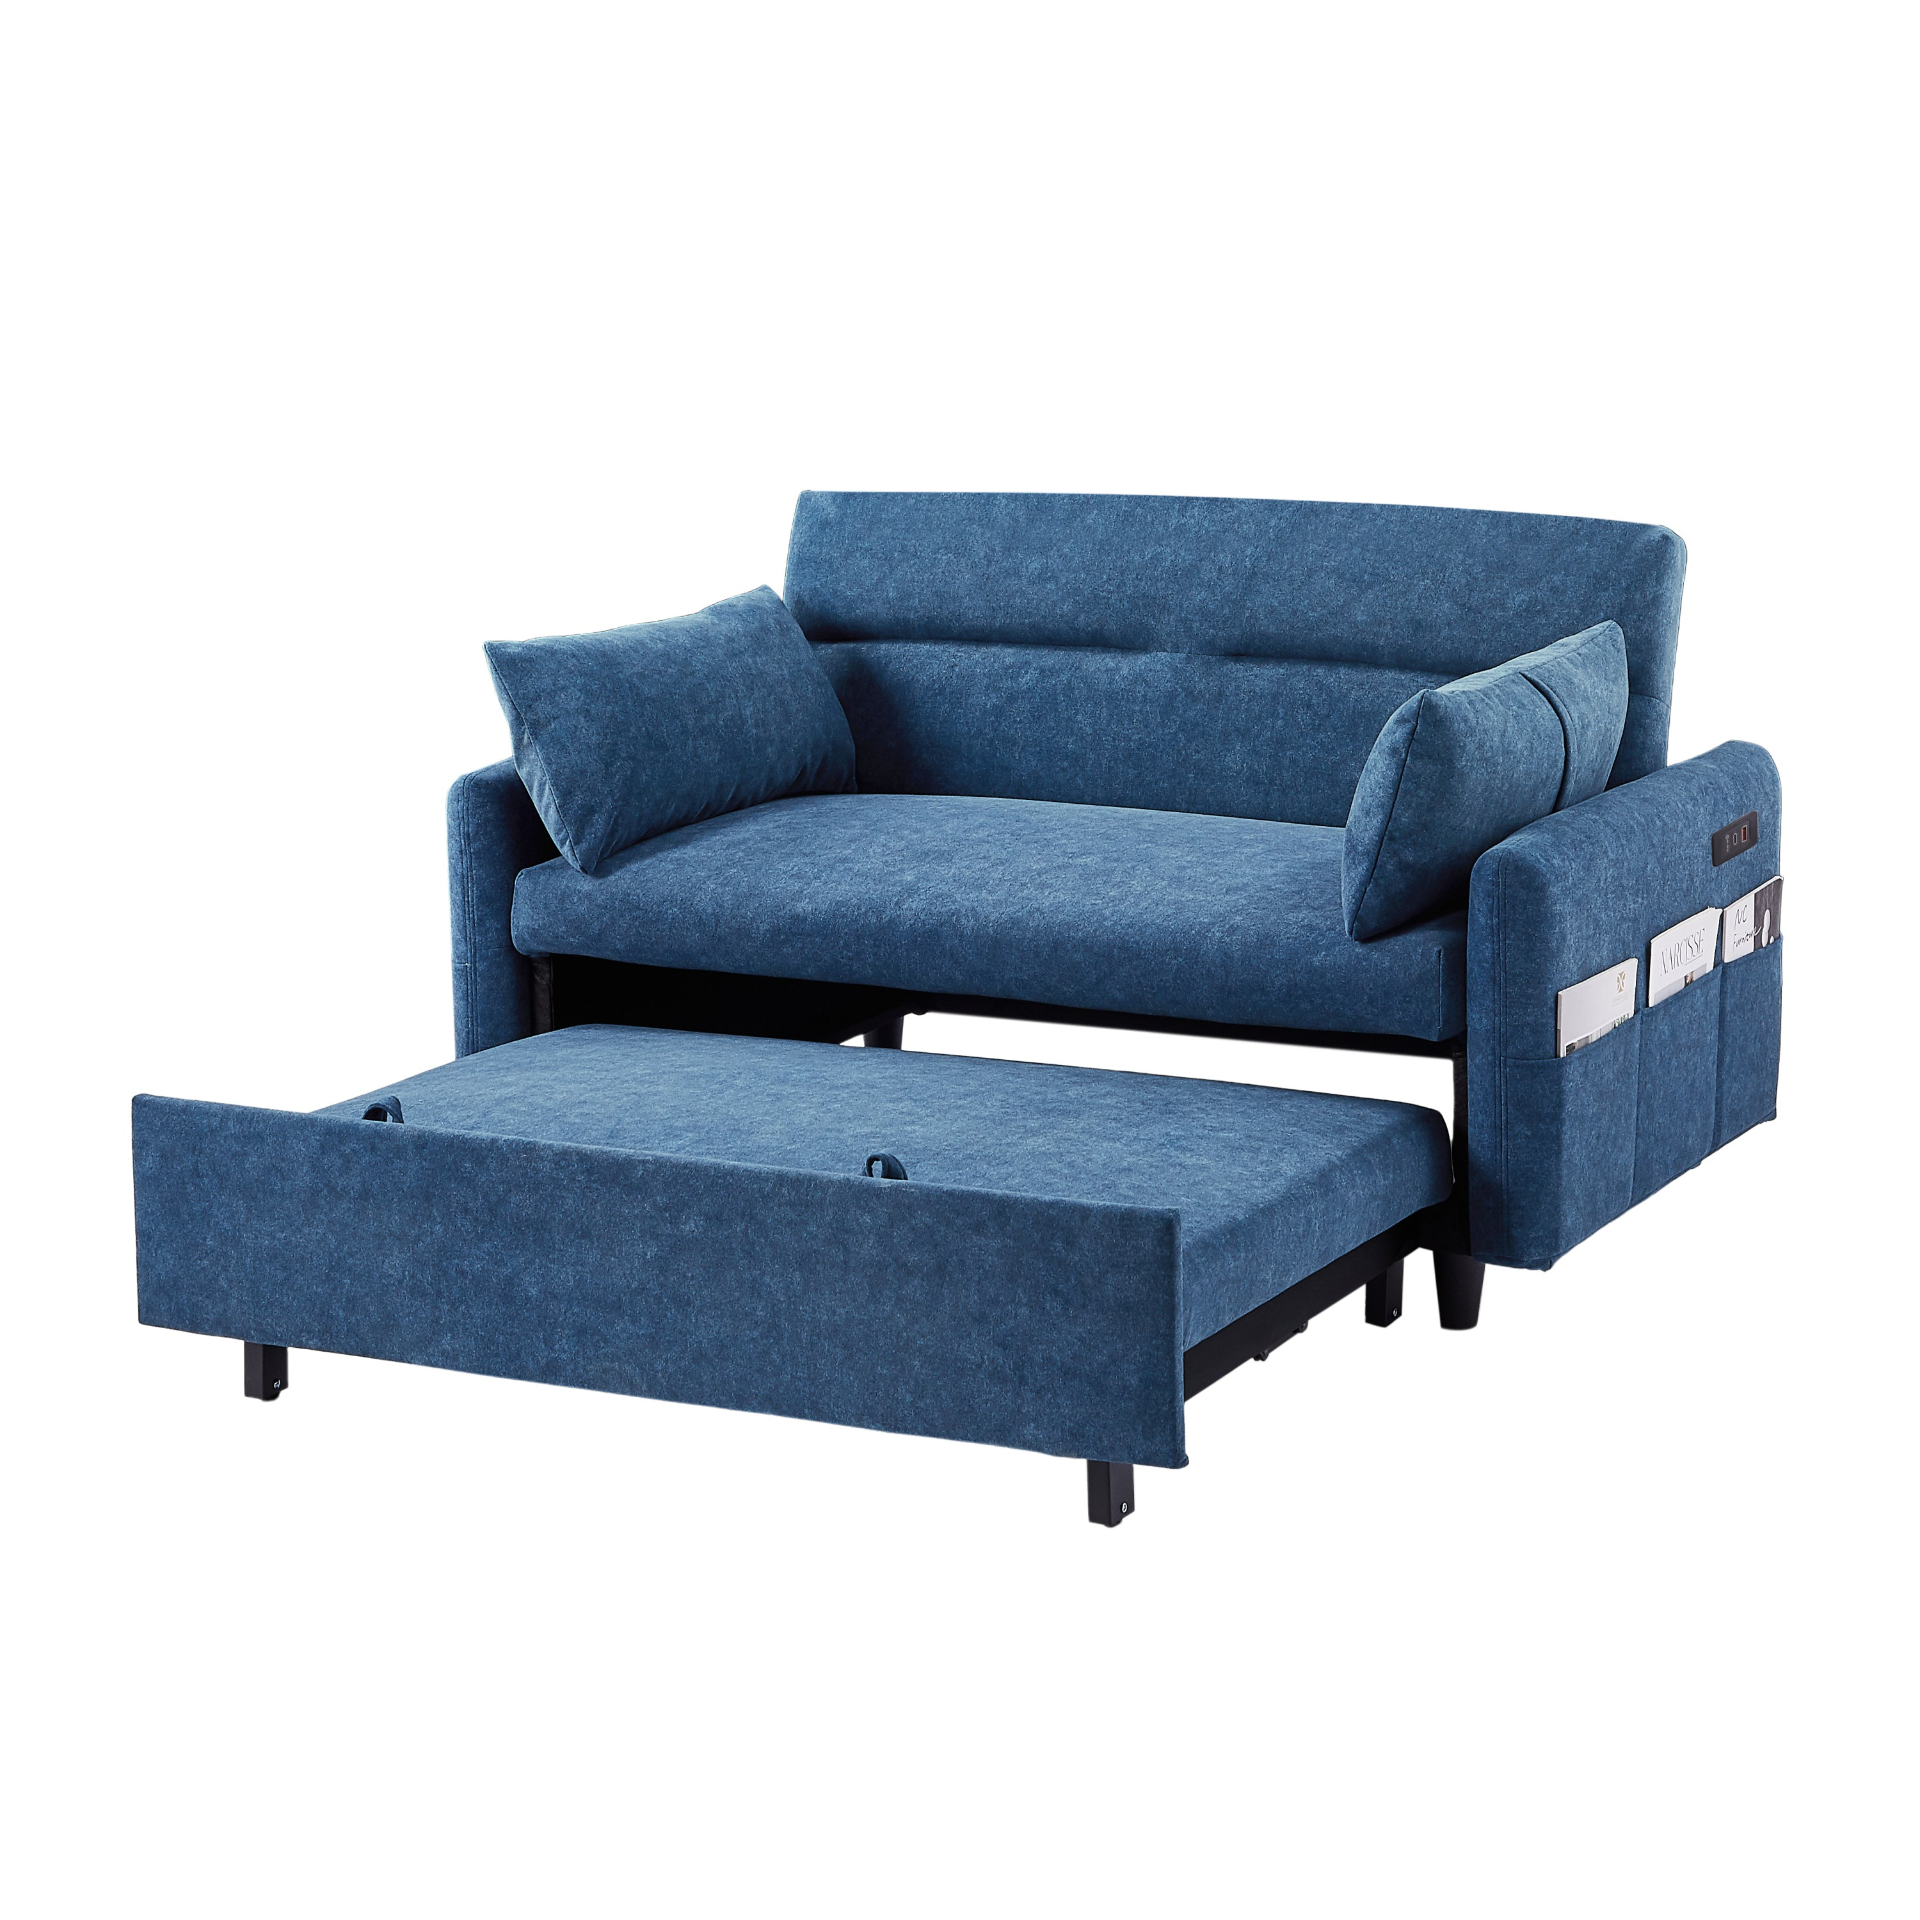 Blue - Urban Chic Loveseat Style Sofa Bed with Adjustable Backrest and USB Ports (55")